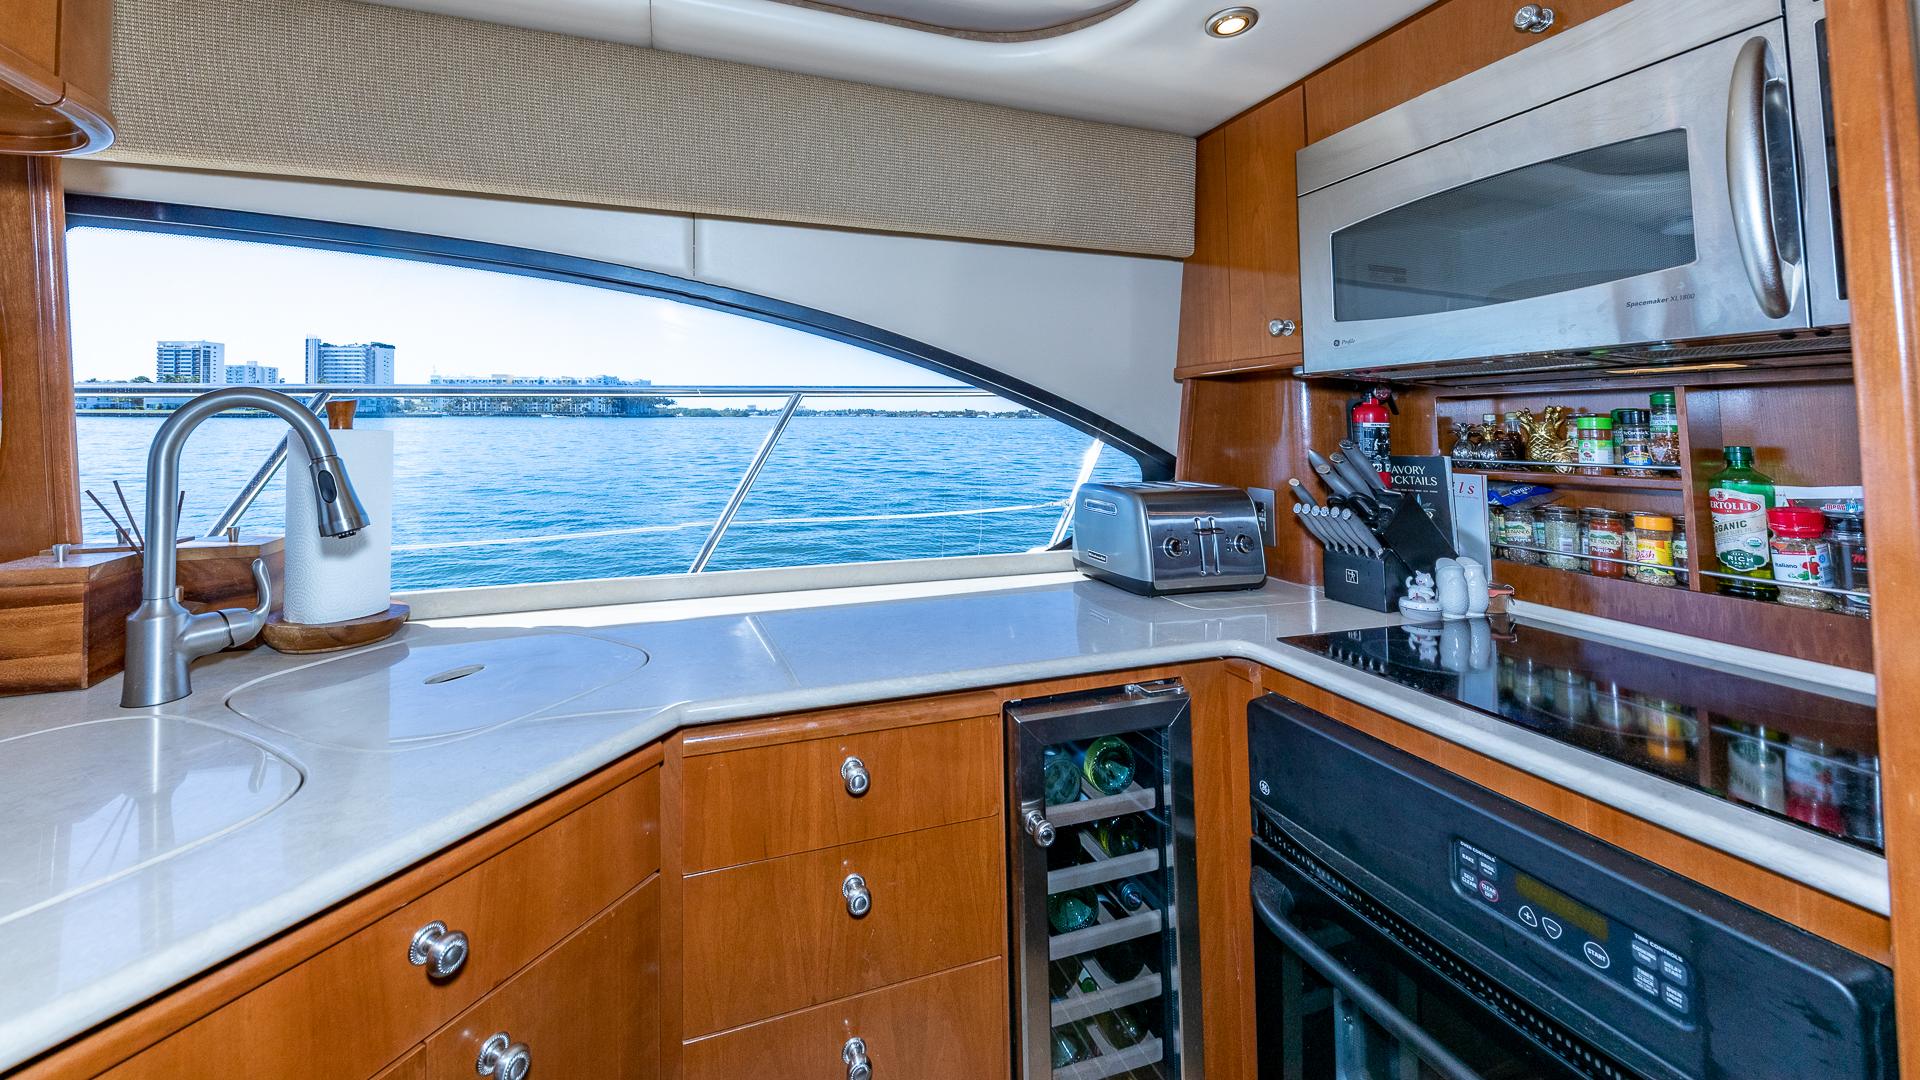 Elegant Lady - Galley With A View!